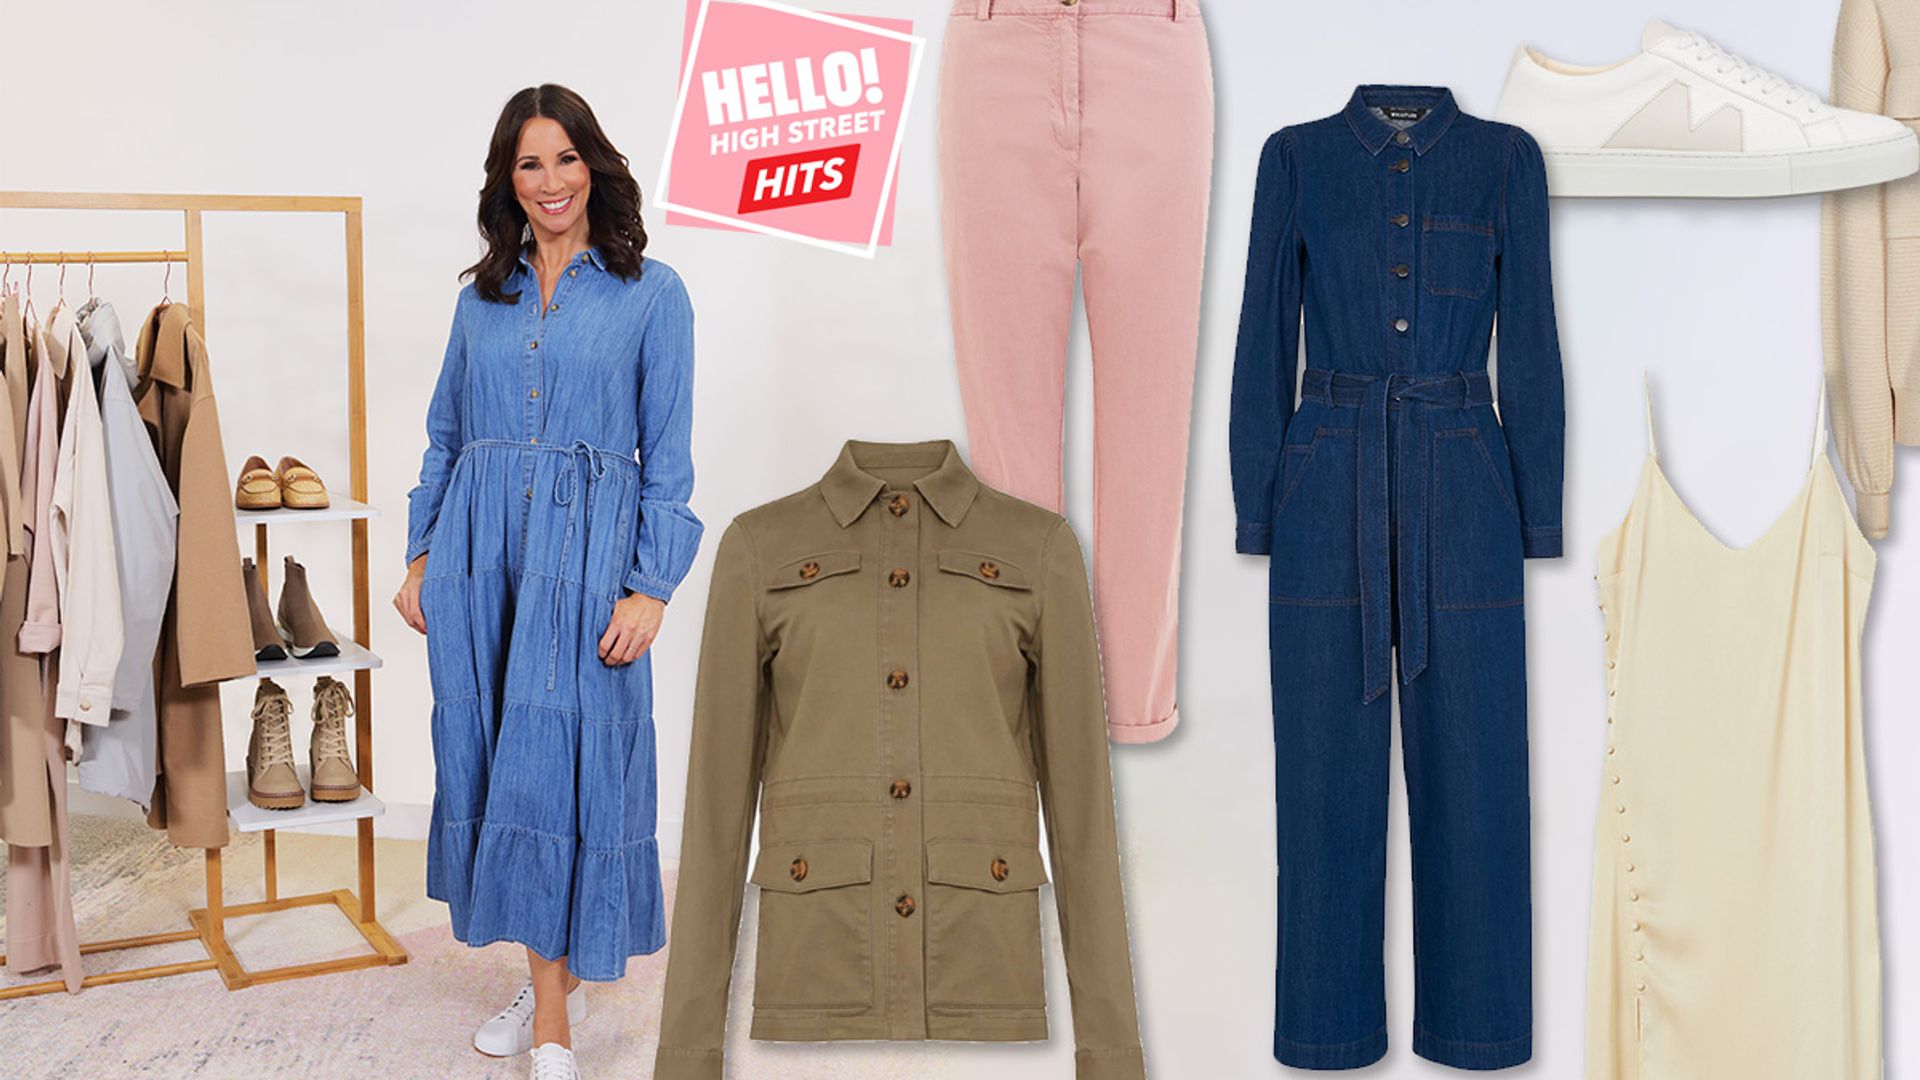 andrea-mclean-high-street-hits-outfits